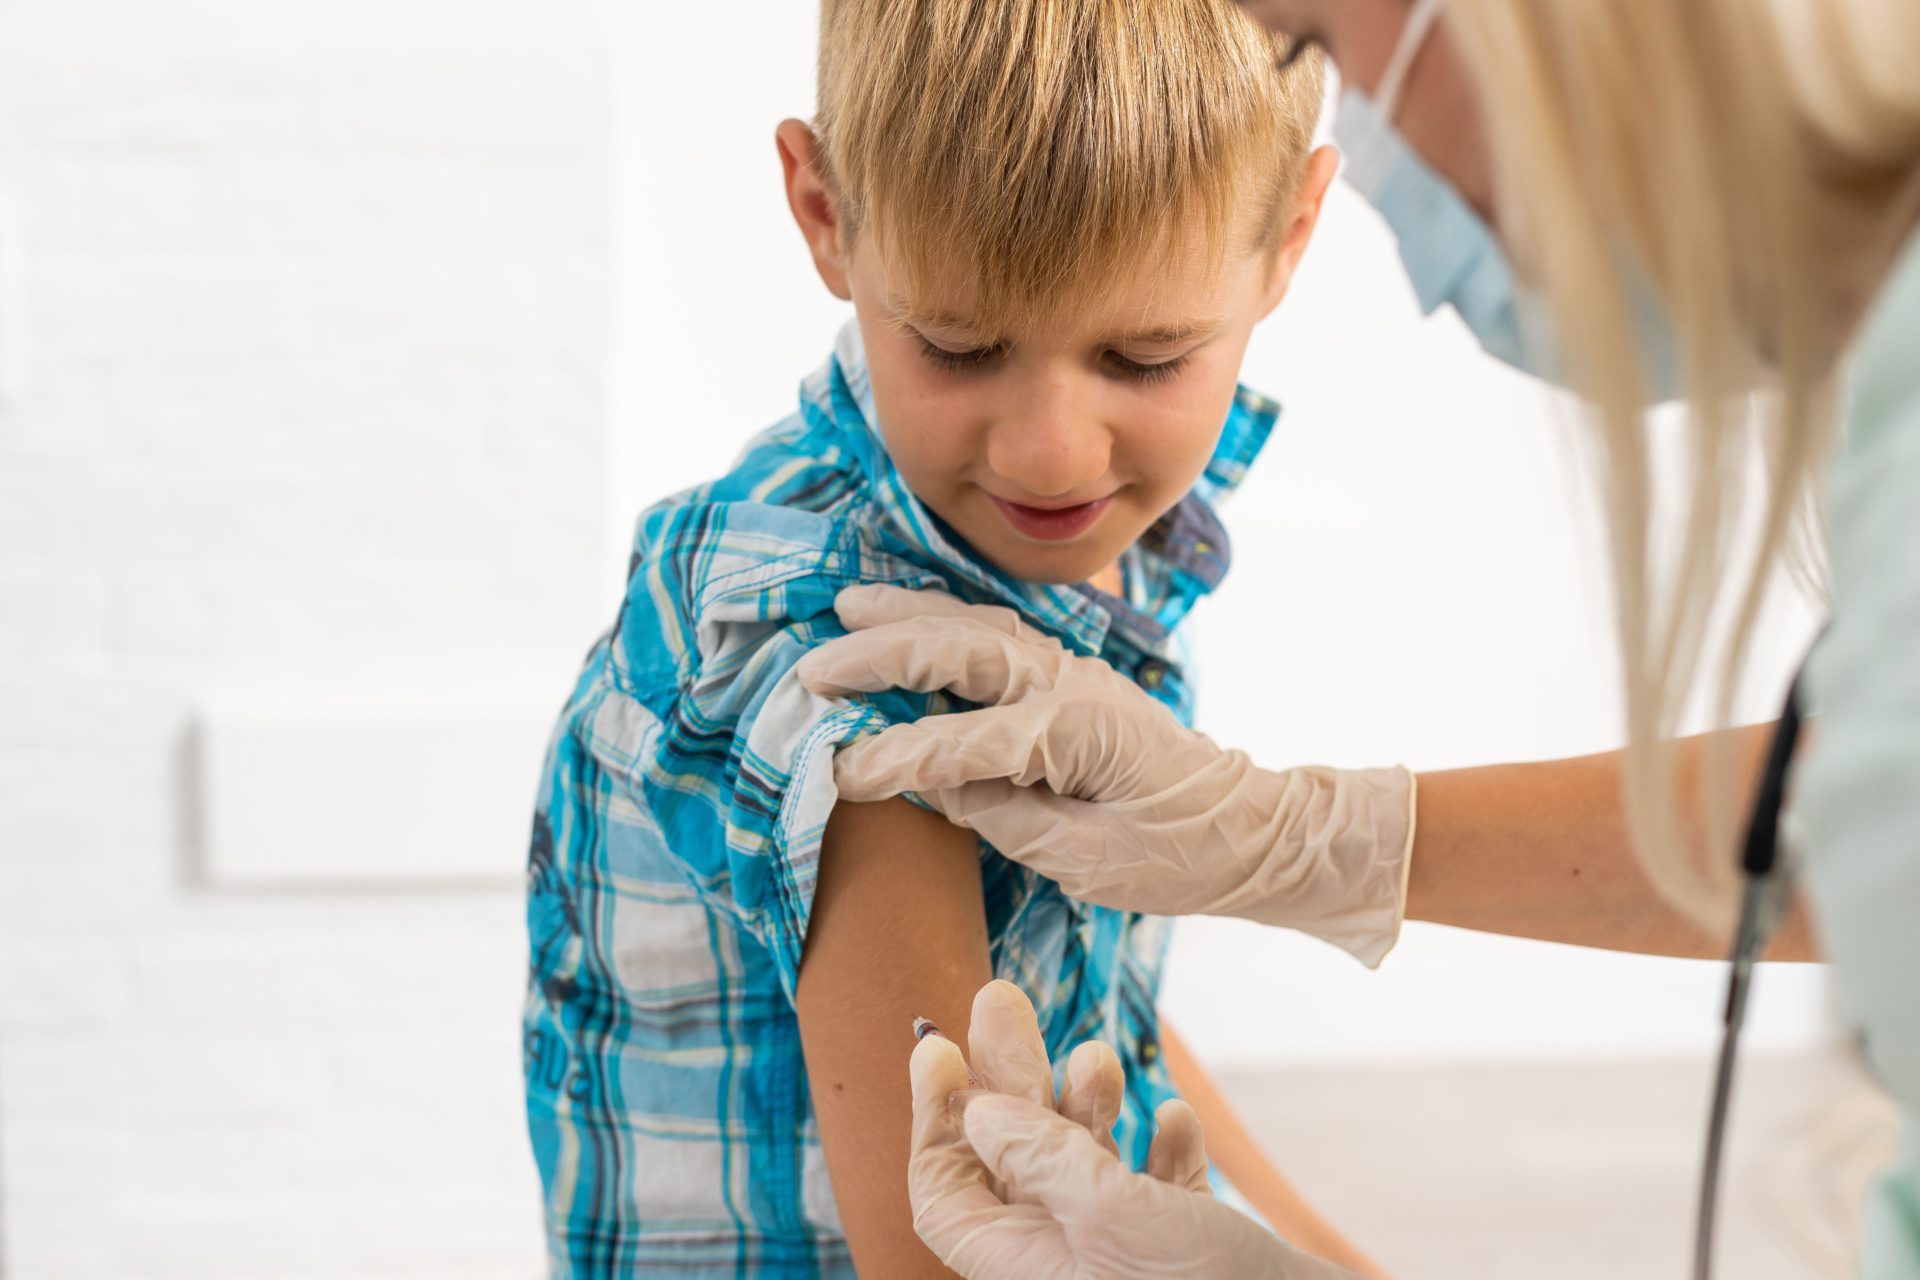 A child gets a vaccine.